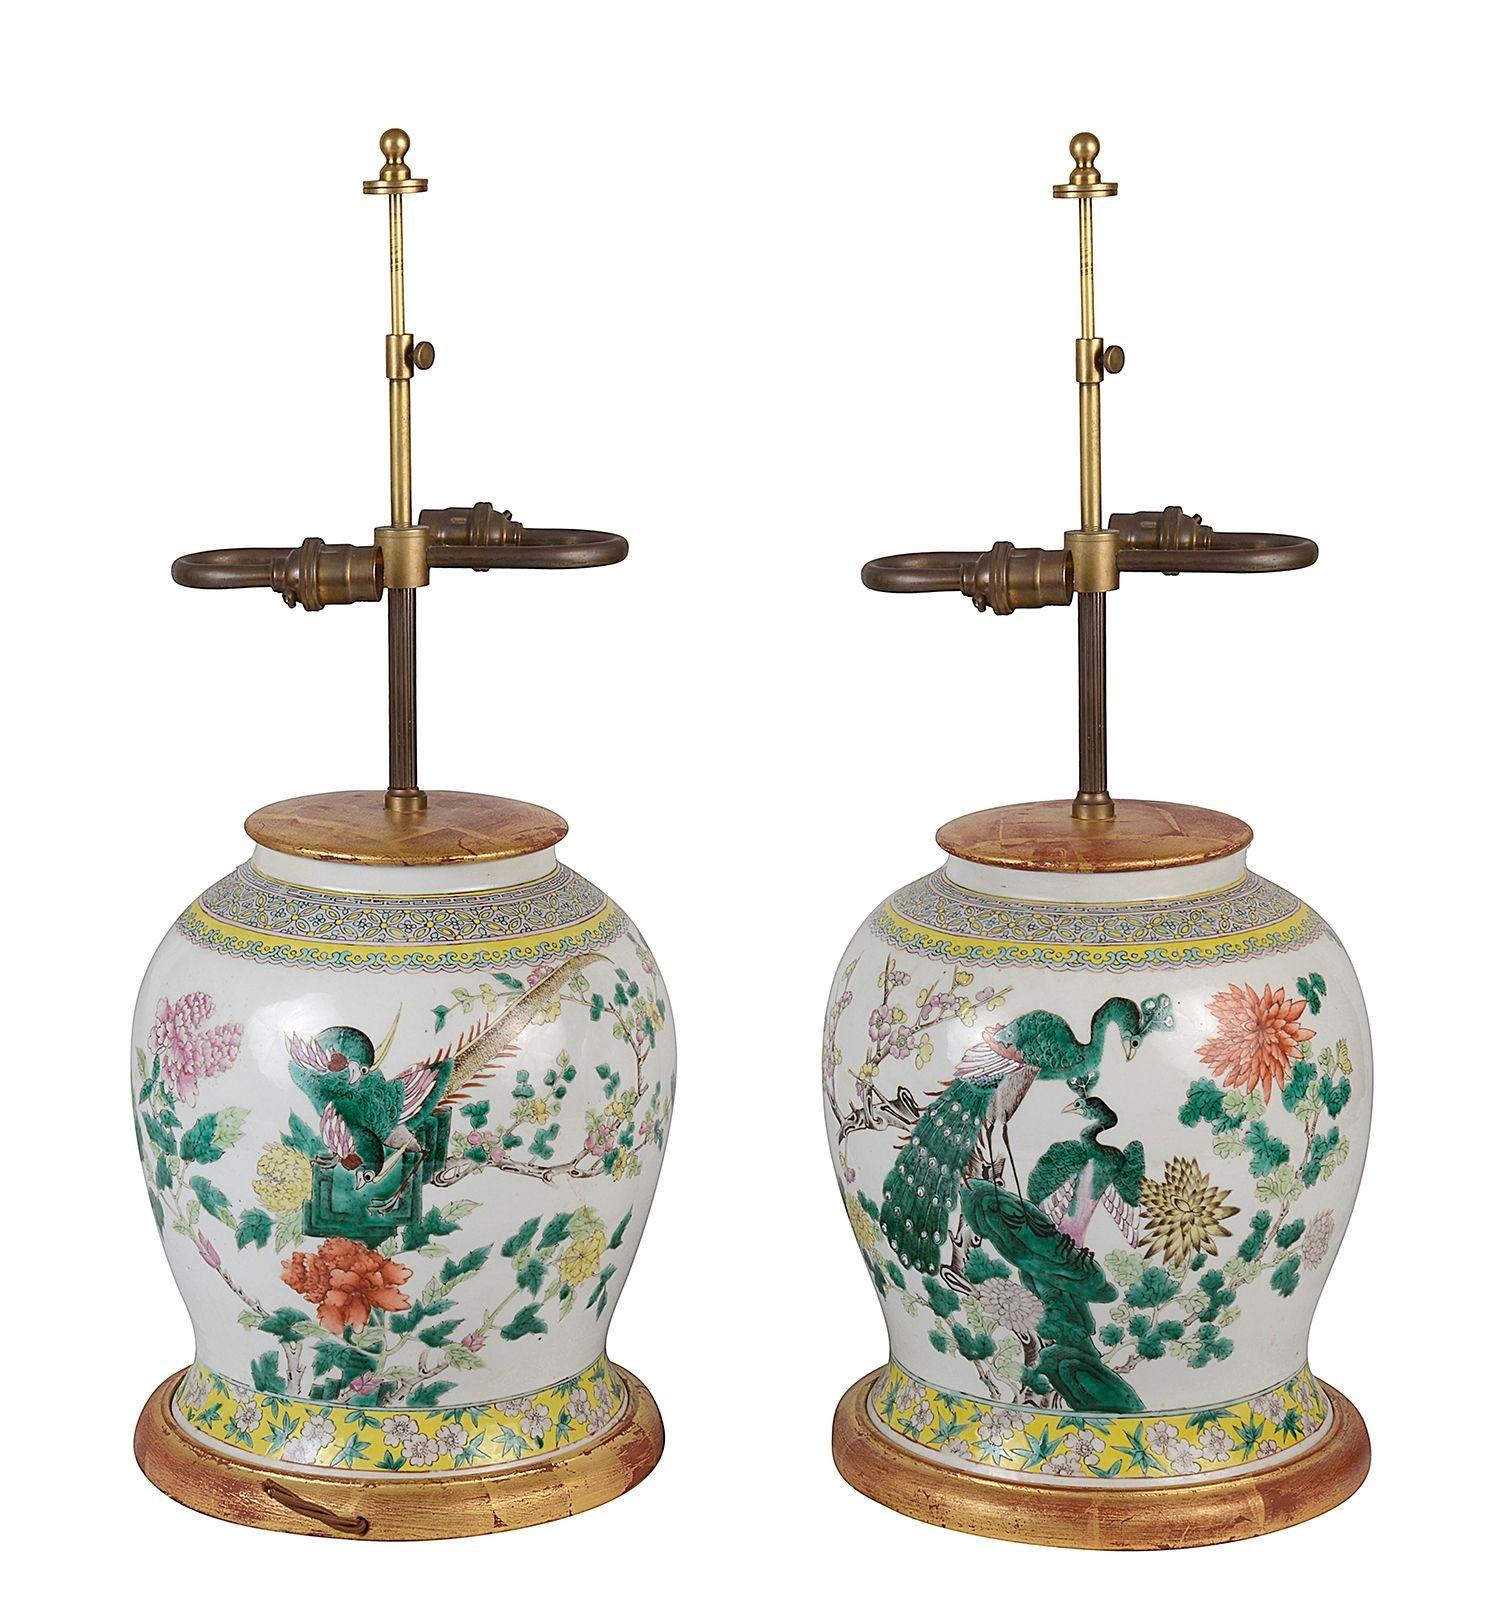 Pair of 19th Century Chinese export Famille Rose Ginger jar lamps, each with wonderful bold coloured exotic birds and flowers, turned gilt wood stands and lids.

Batch 76 G9740/22 TNYZ